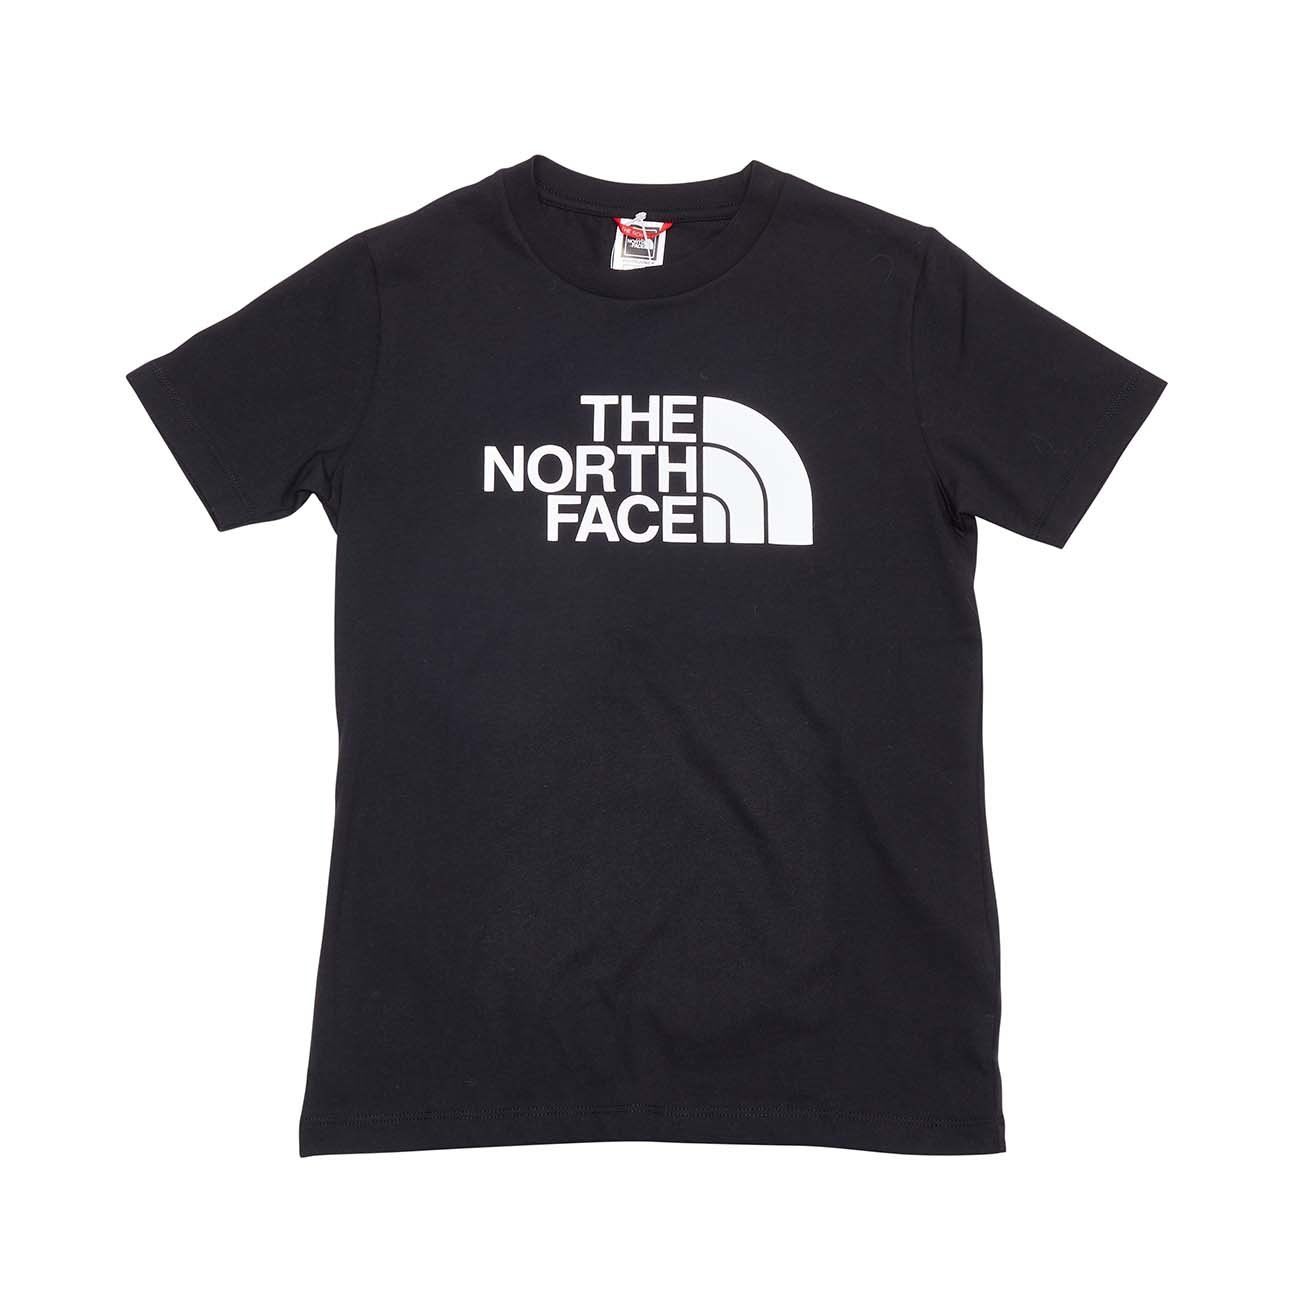 Black T-SHIRT Mascheroni | LOGO FACE White THE EASY NORTH Store Kid WITH